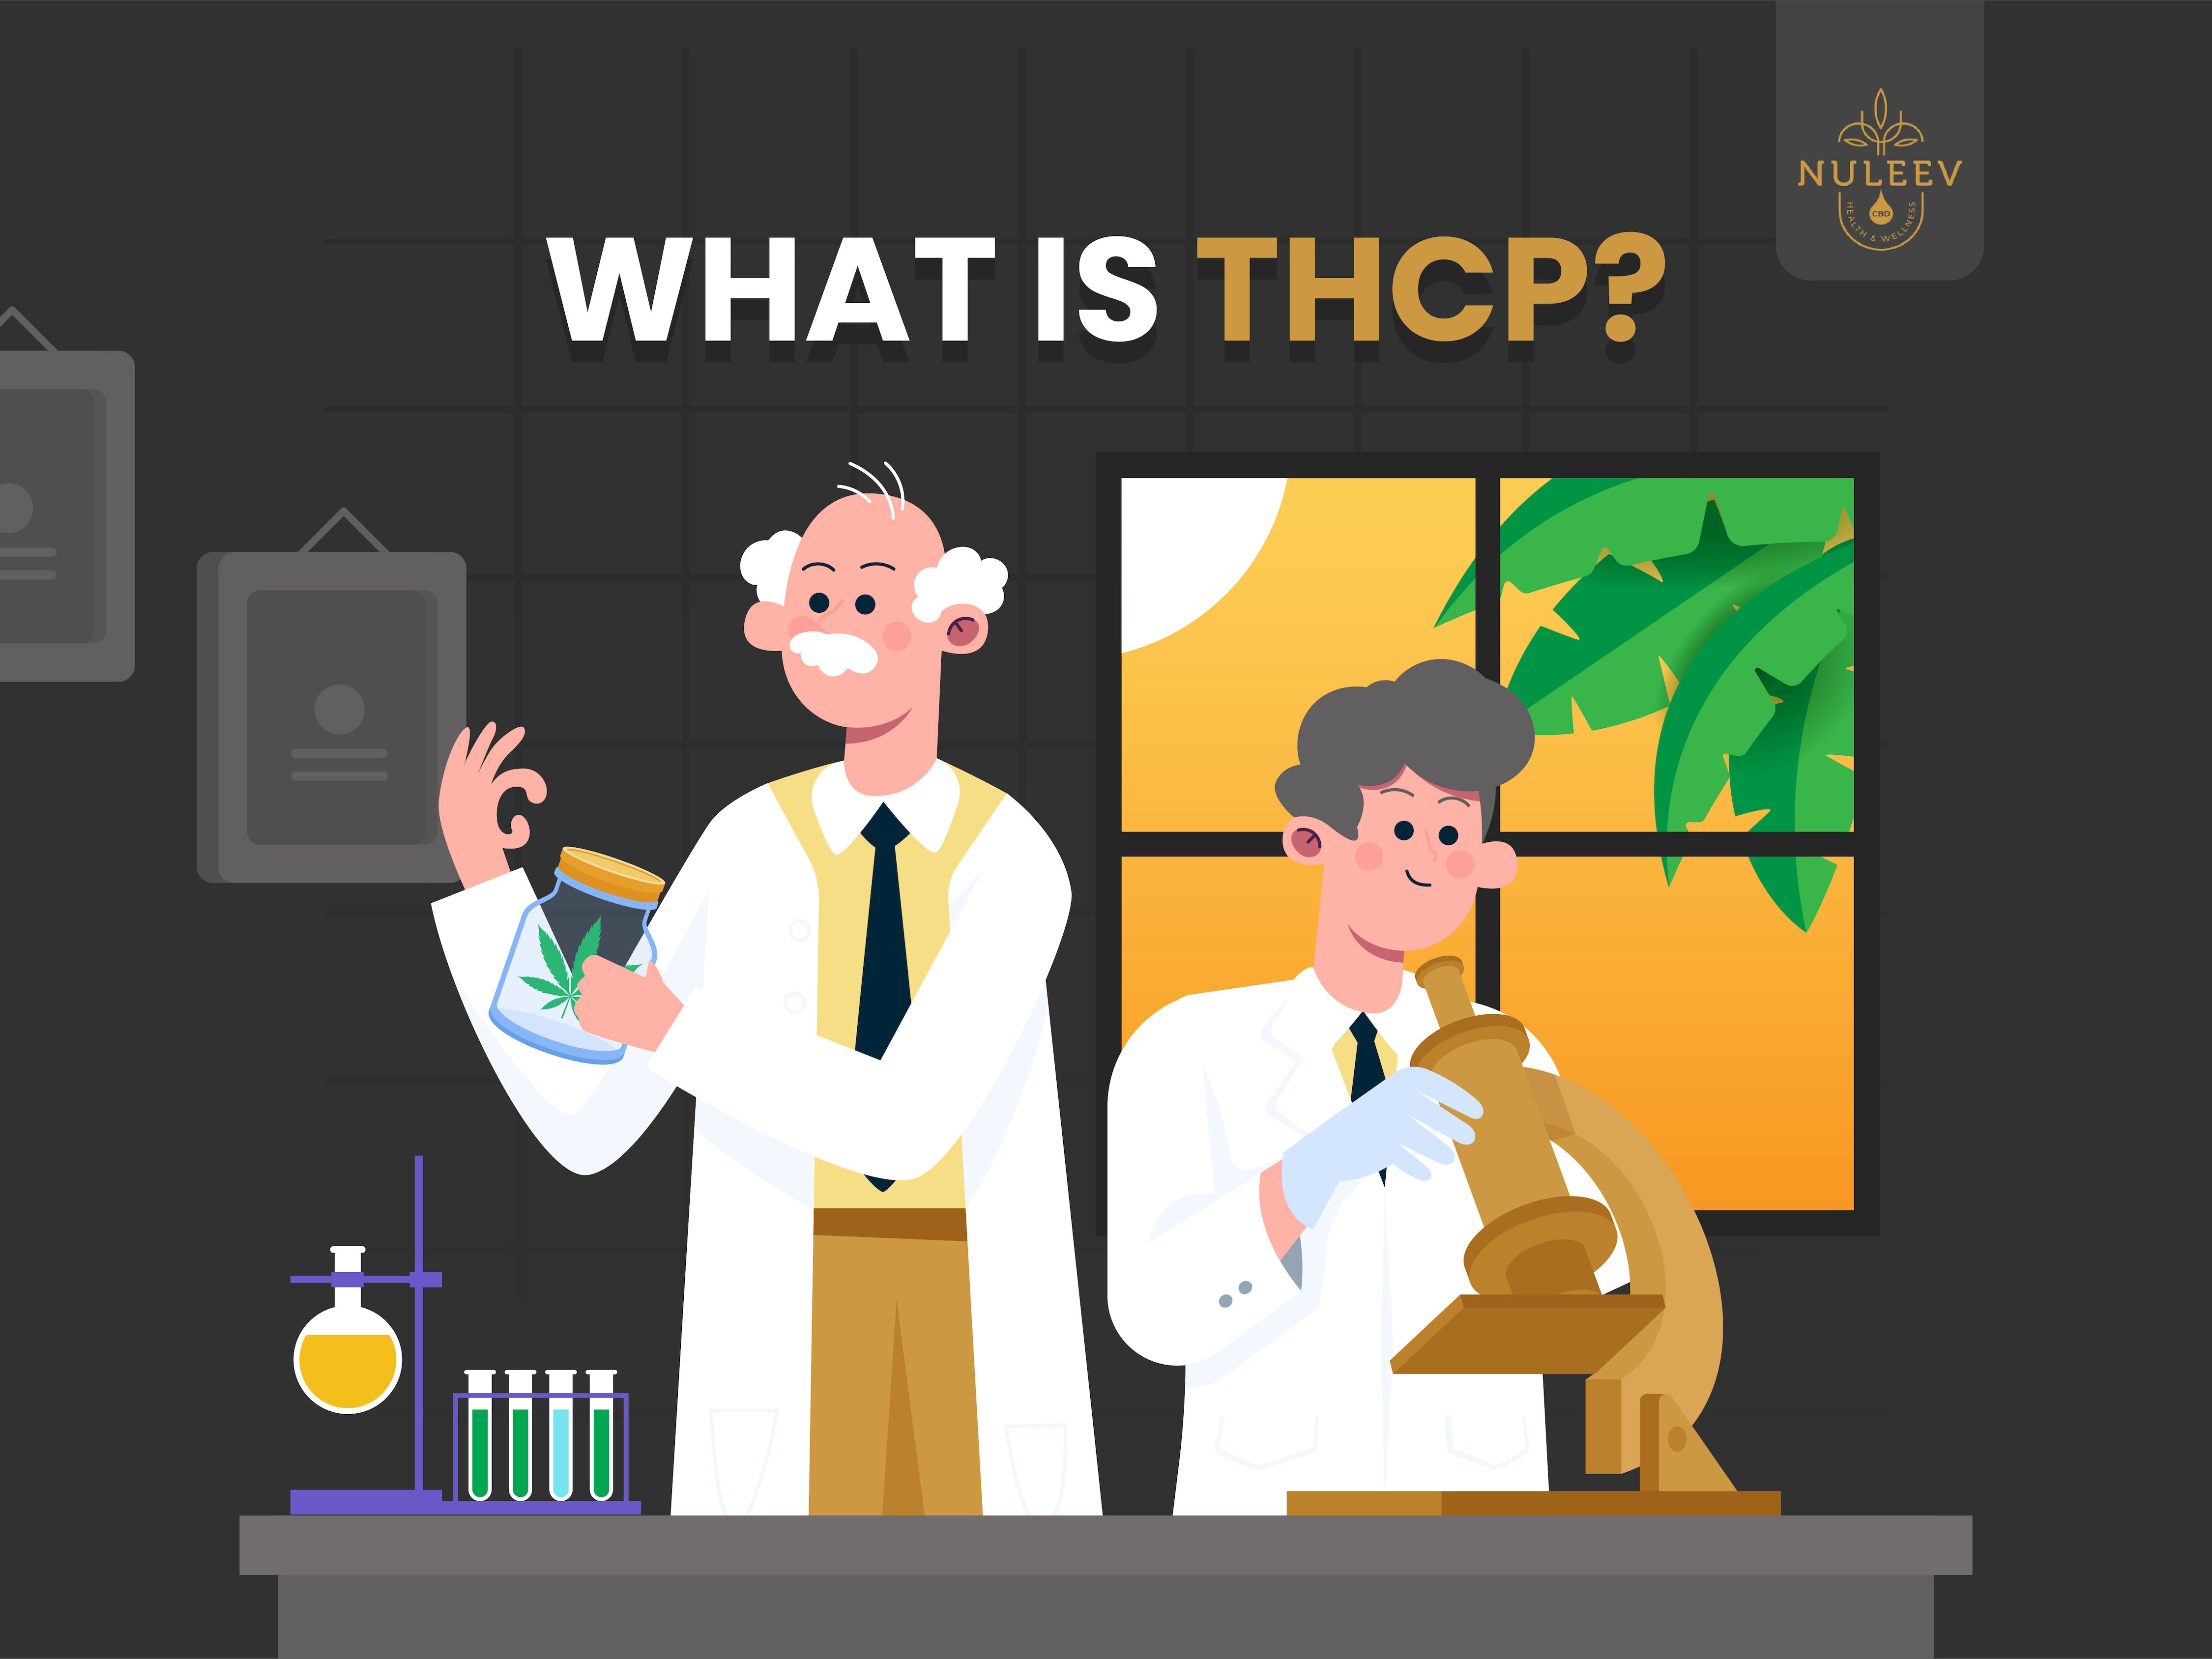 THCP vs THC: What's The Difference